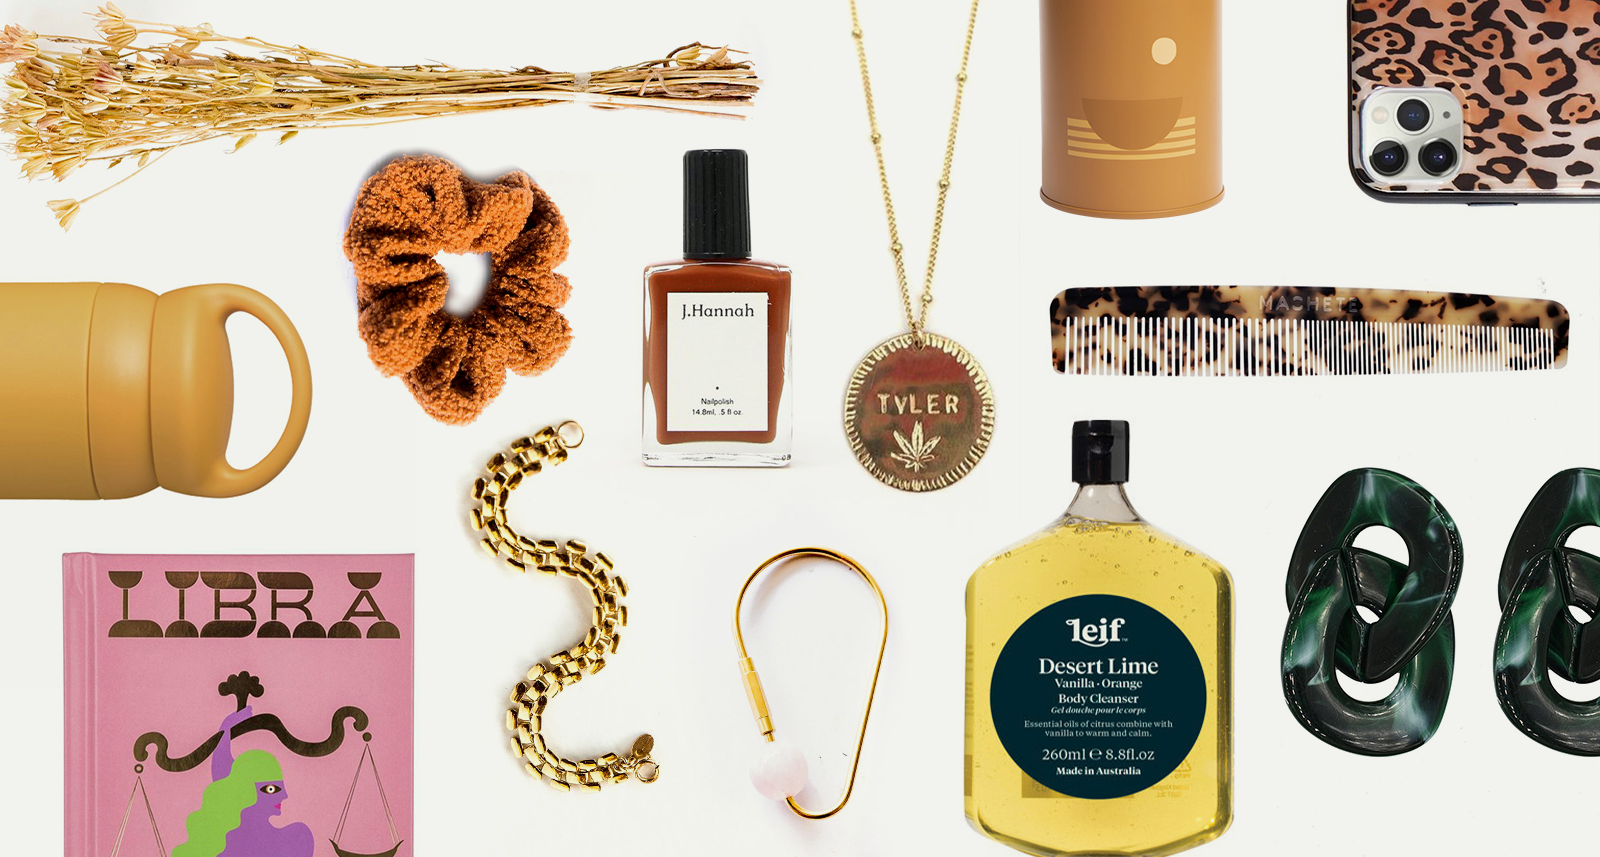 Shop Small, Gift Big: Gifts Ideas from Brands We Love